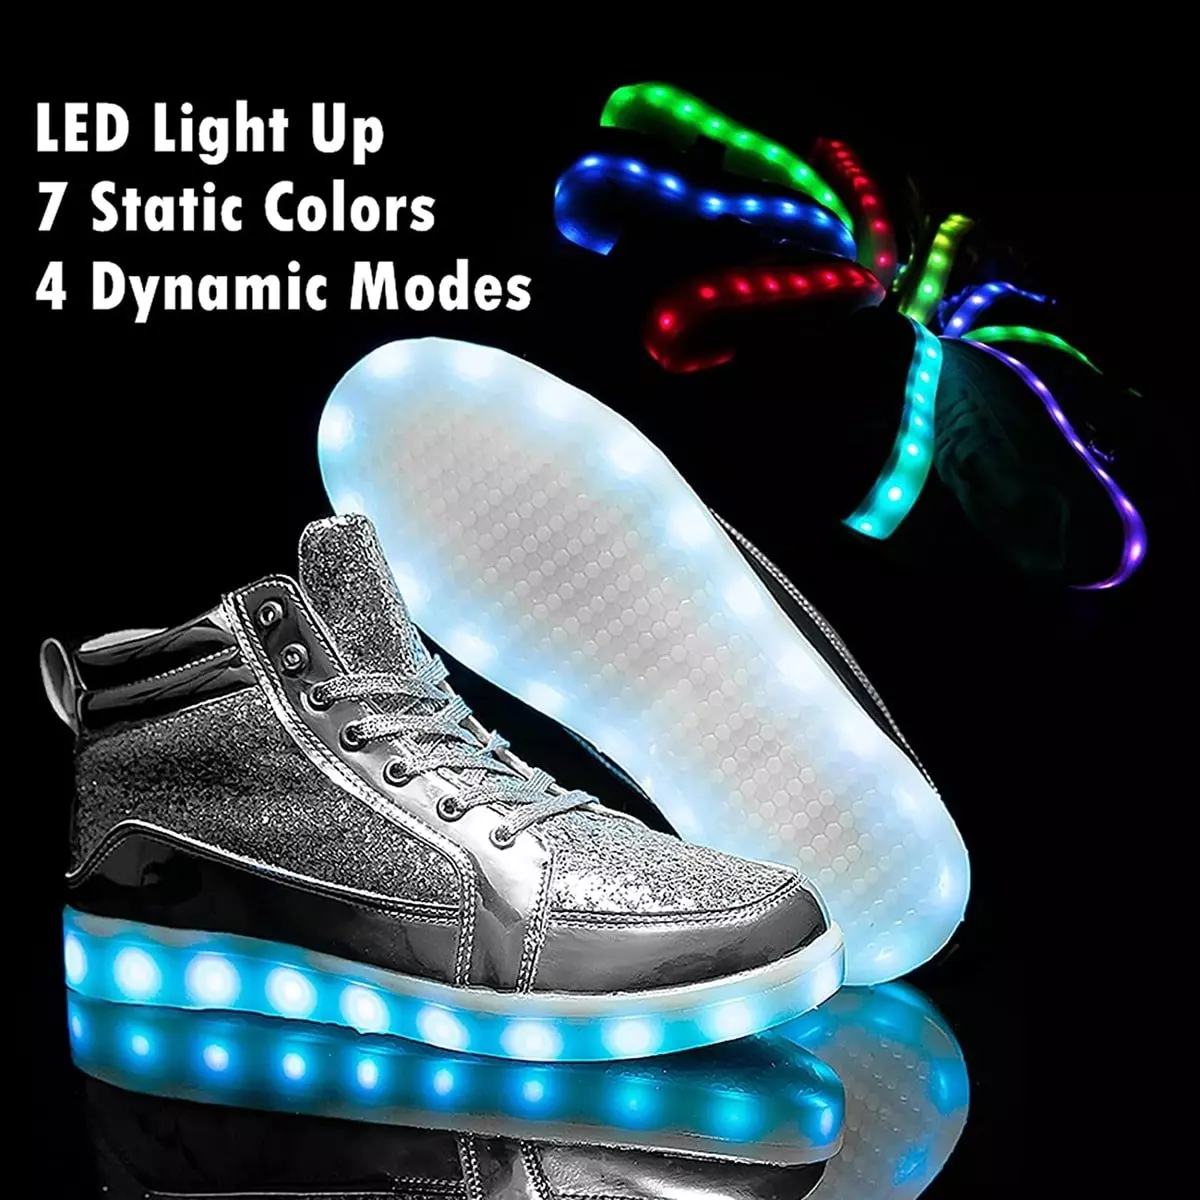 American flag LED light-up sneakers